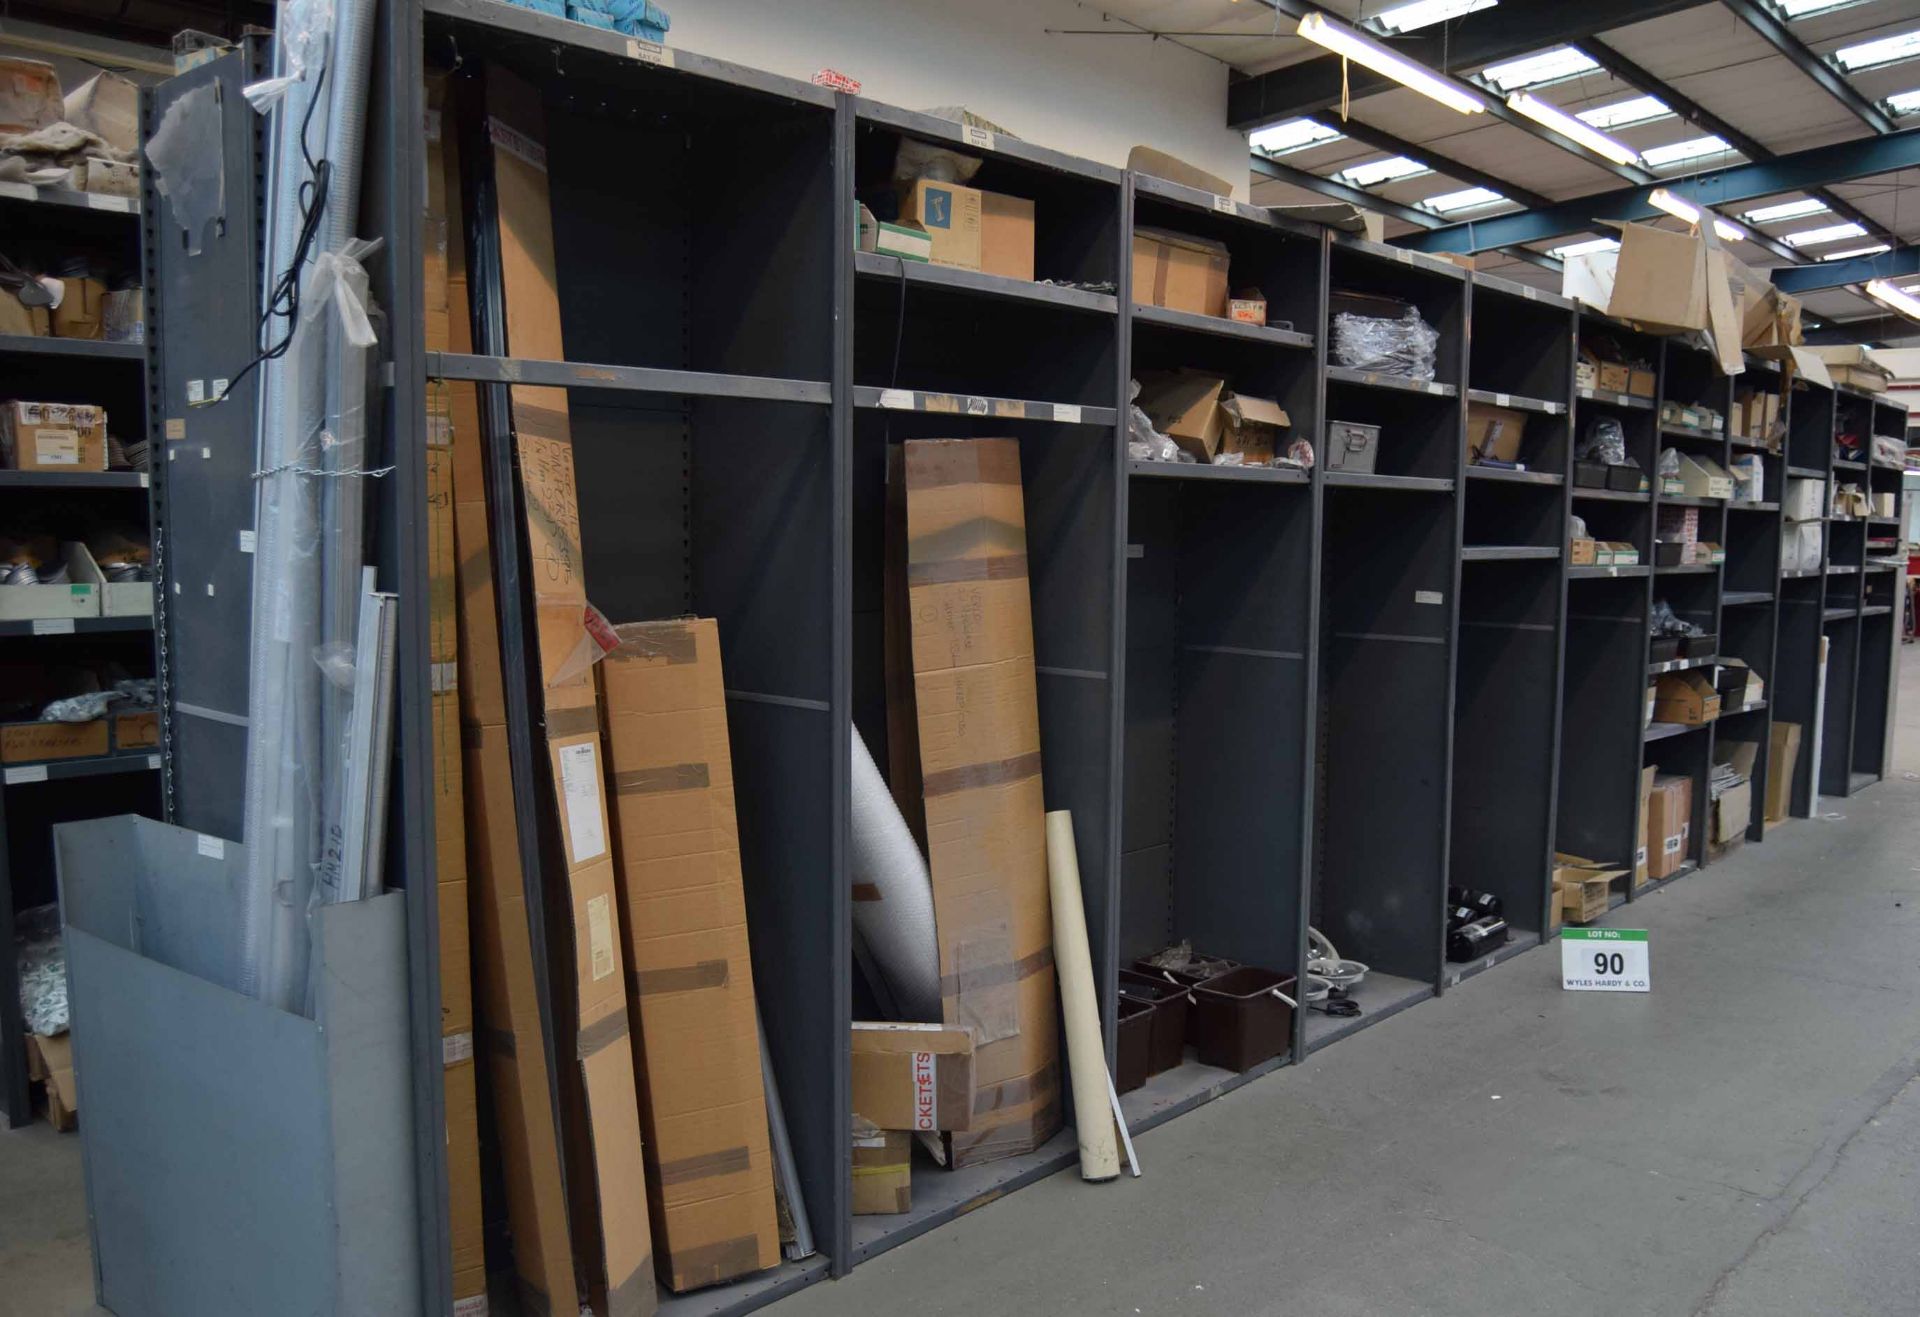 Eleven Bays of Parts Racking with Contents including Chiller Cabinet Blinds, Evaporating Trays,